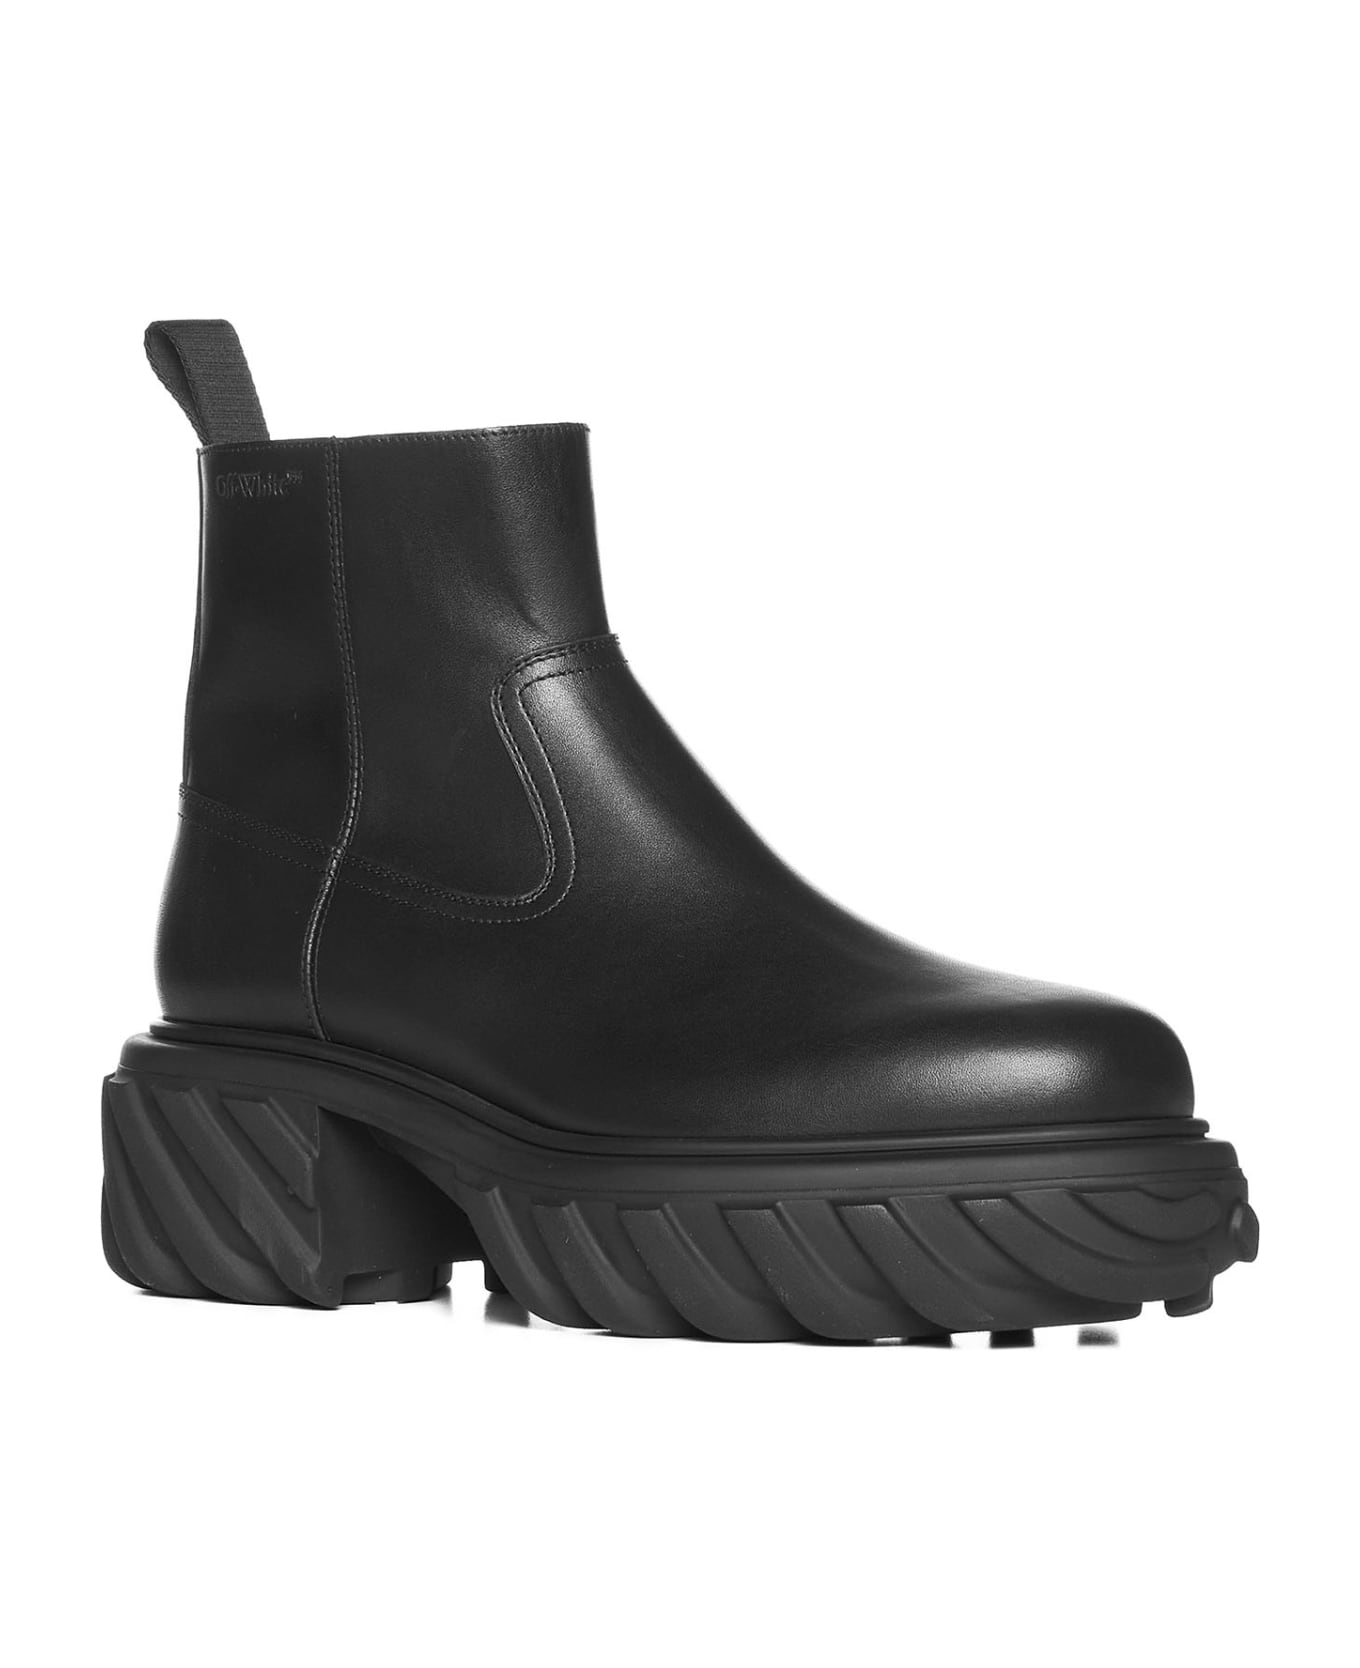 Off-White Tractor Motor Ankle Boots - Black